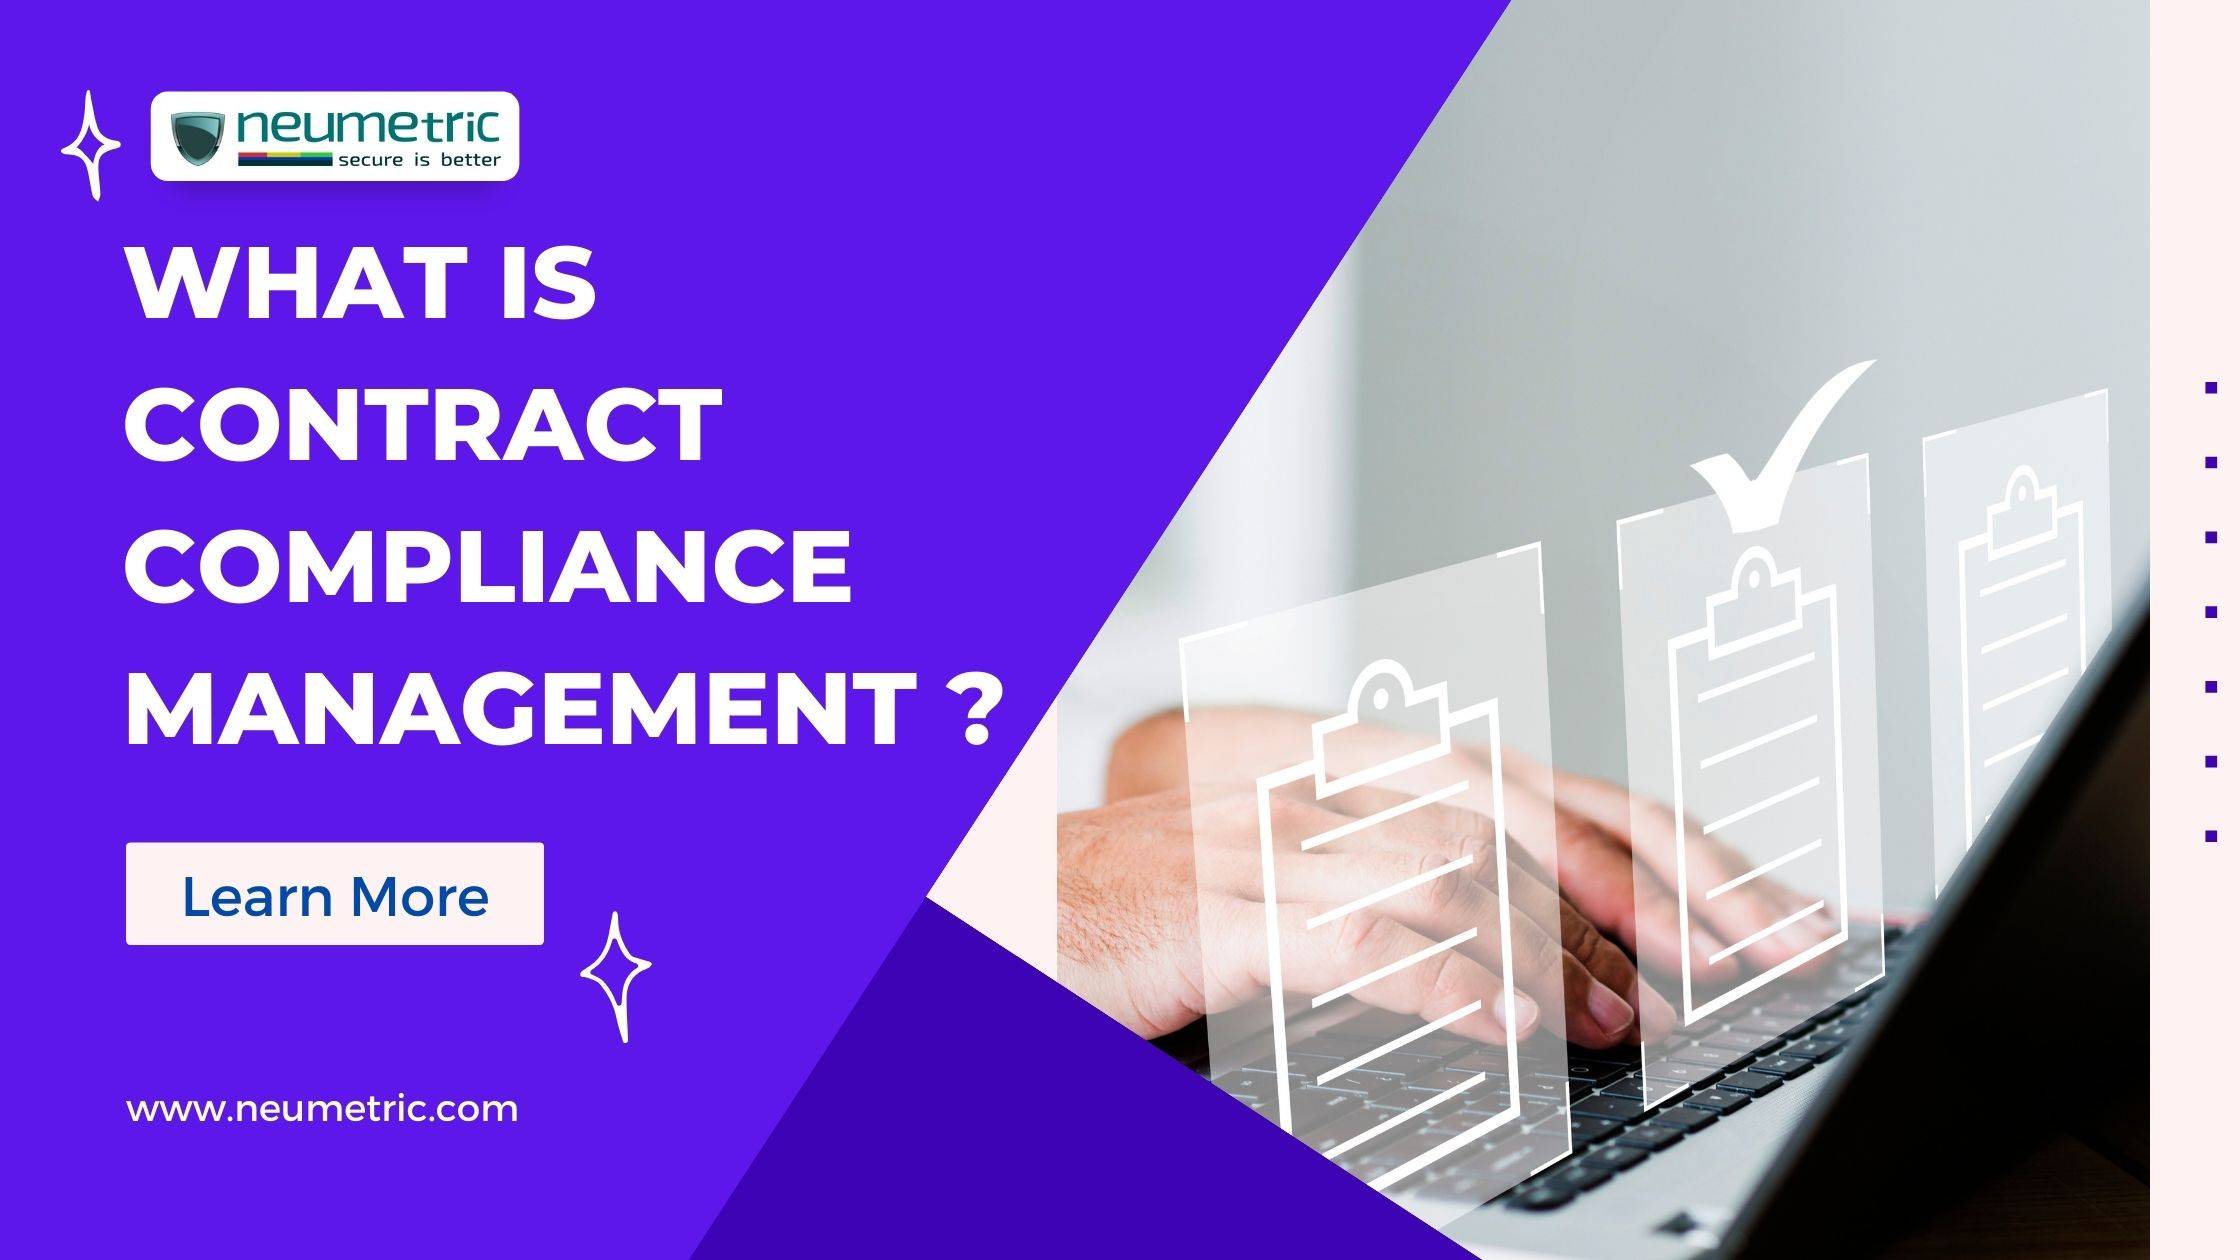 What is Contract Compliance Management?